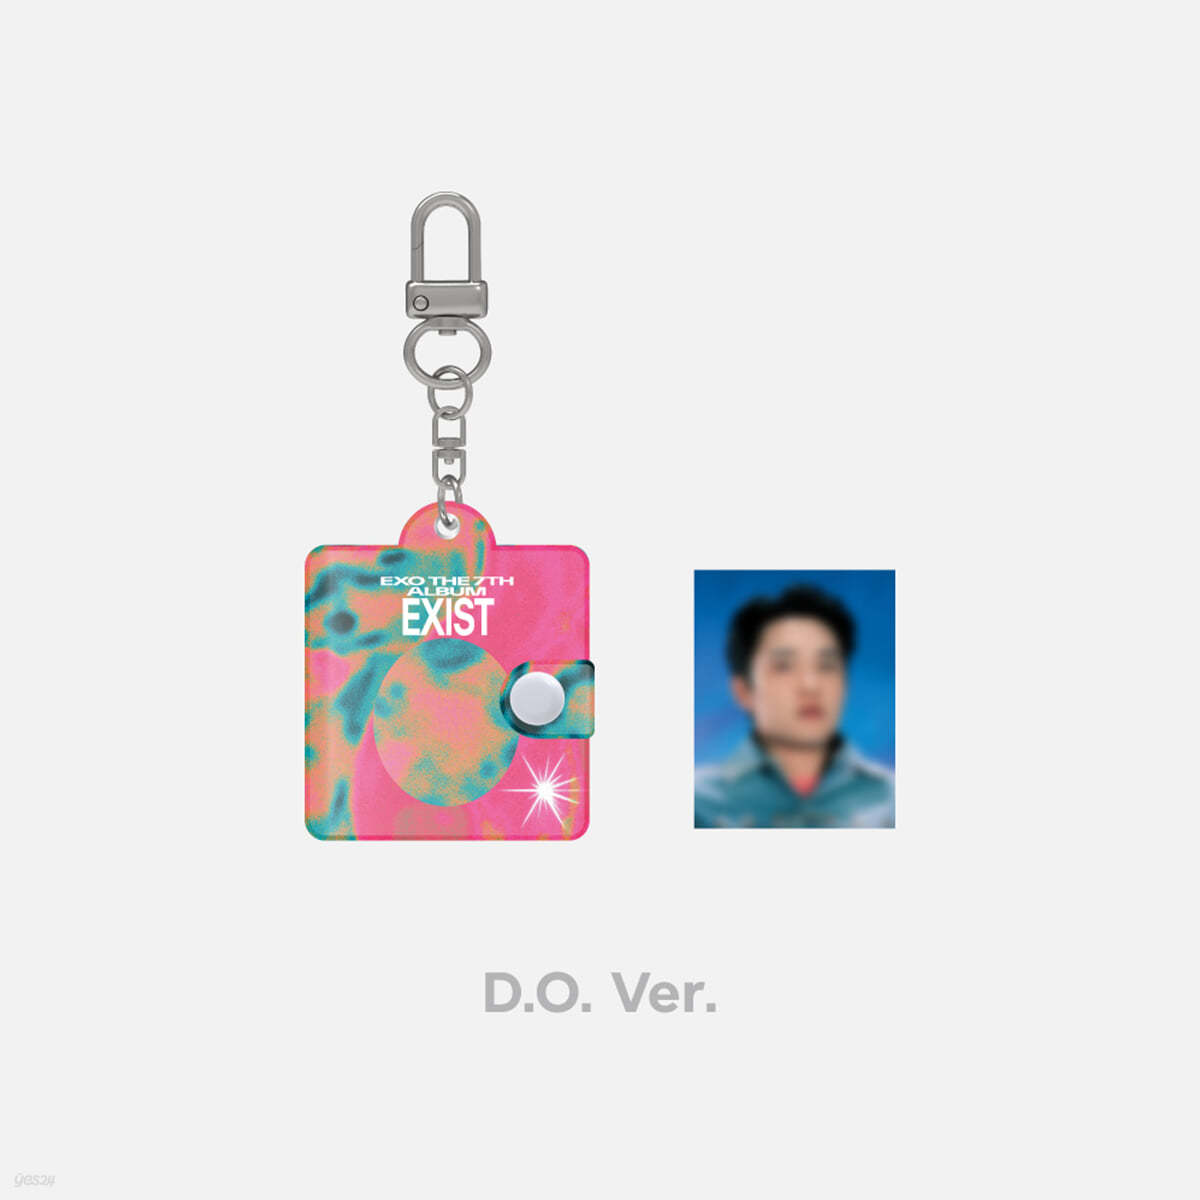 [EXO - EXIST] ID PHOTO COLLECT BOOK KEY RING [D.O. ver.]